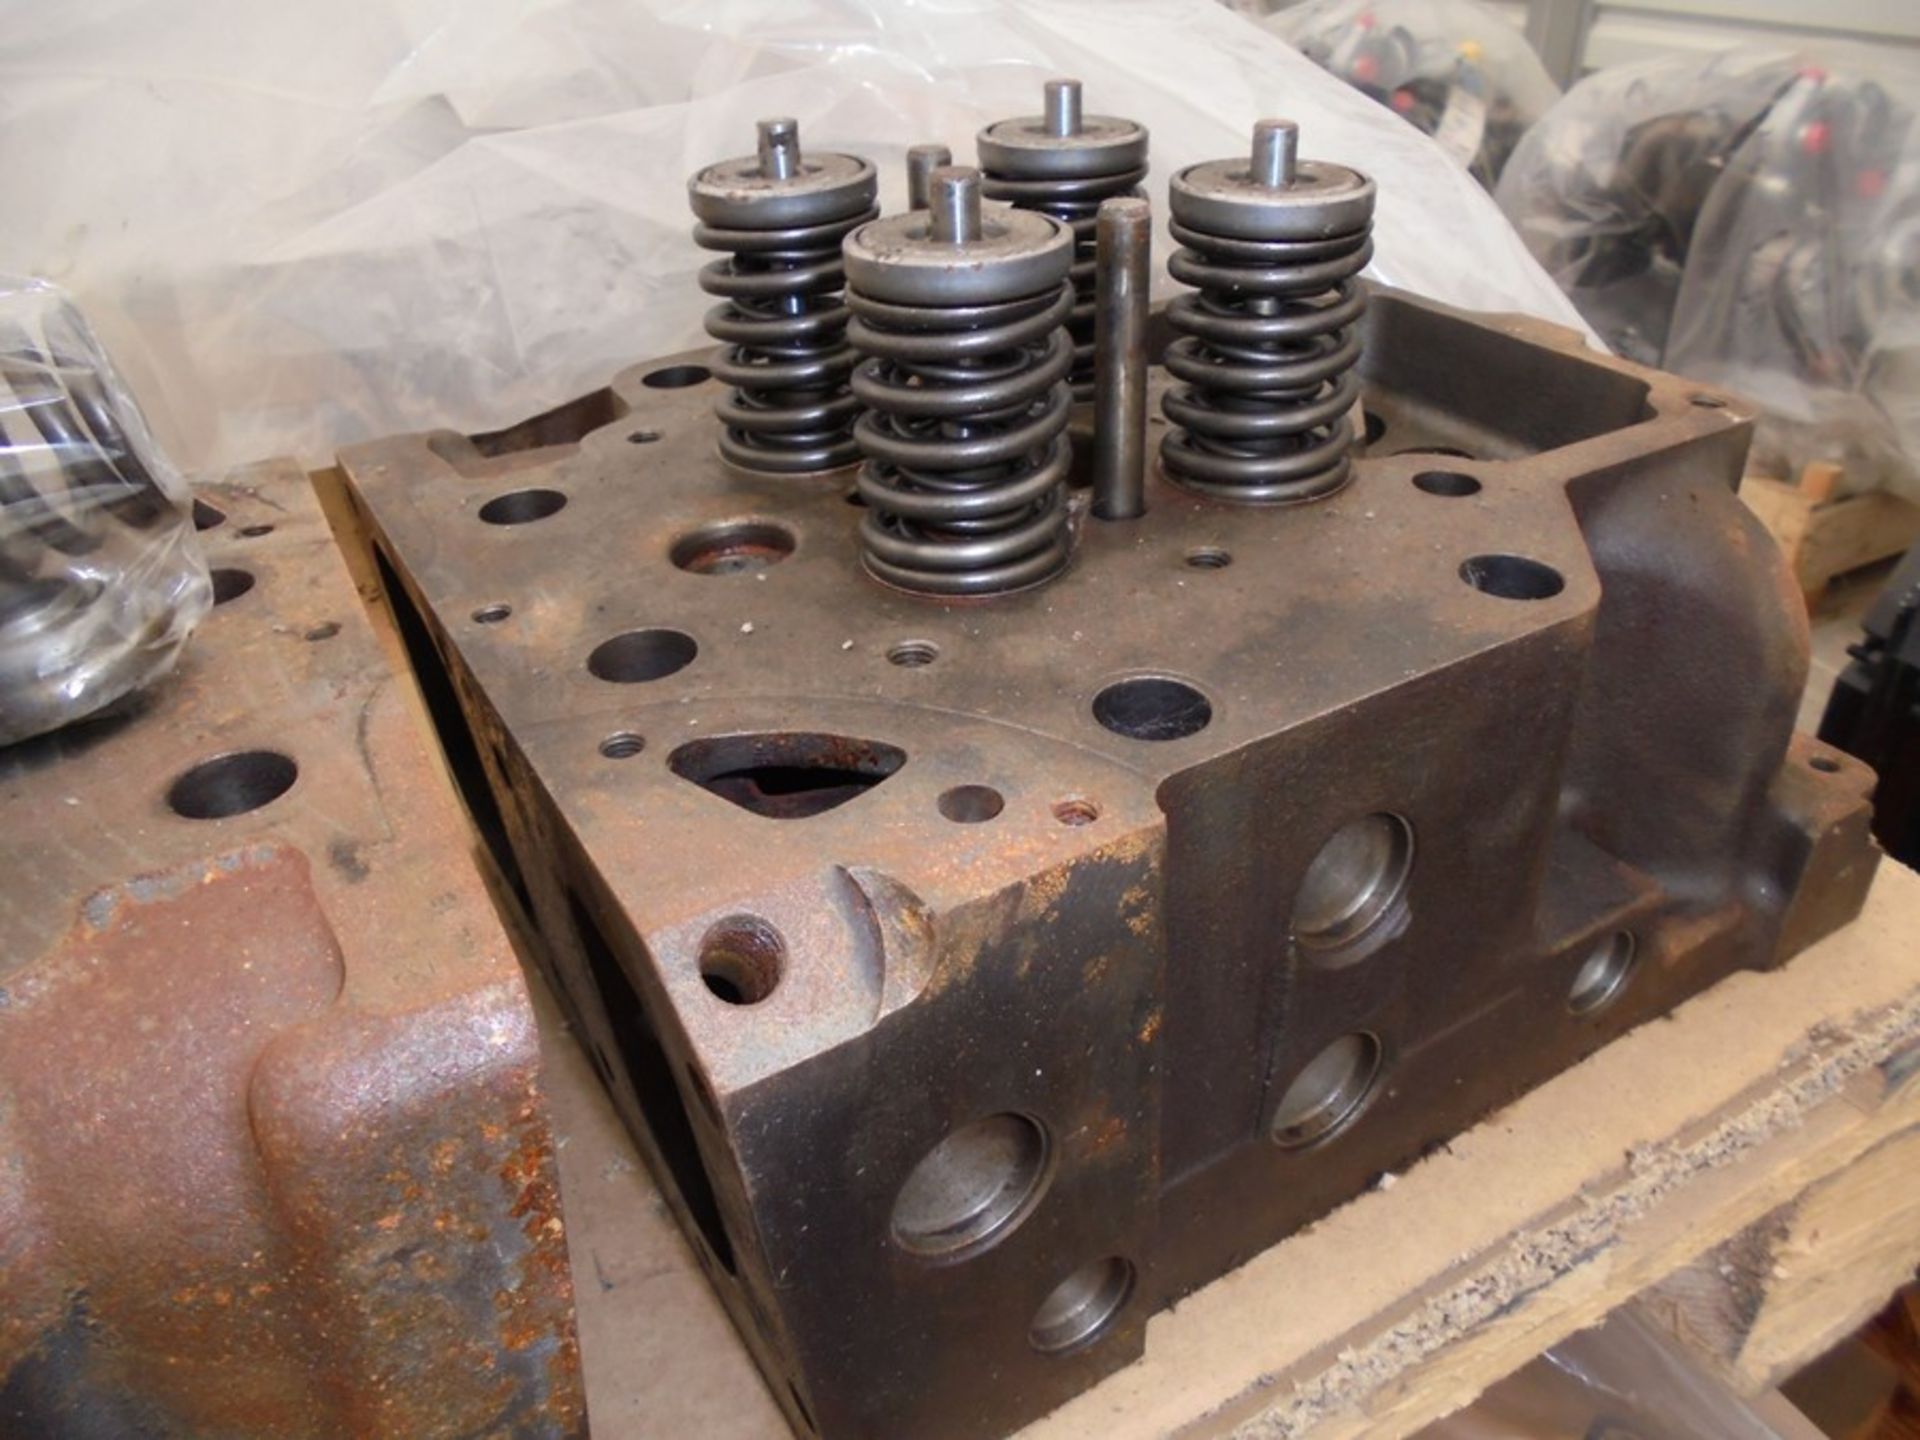 5 x used Caterpillar 3516 cylinder heads, part numbers 205-1560 and 20R3547 (mostly without valves).